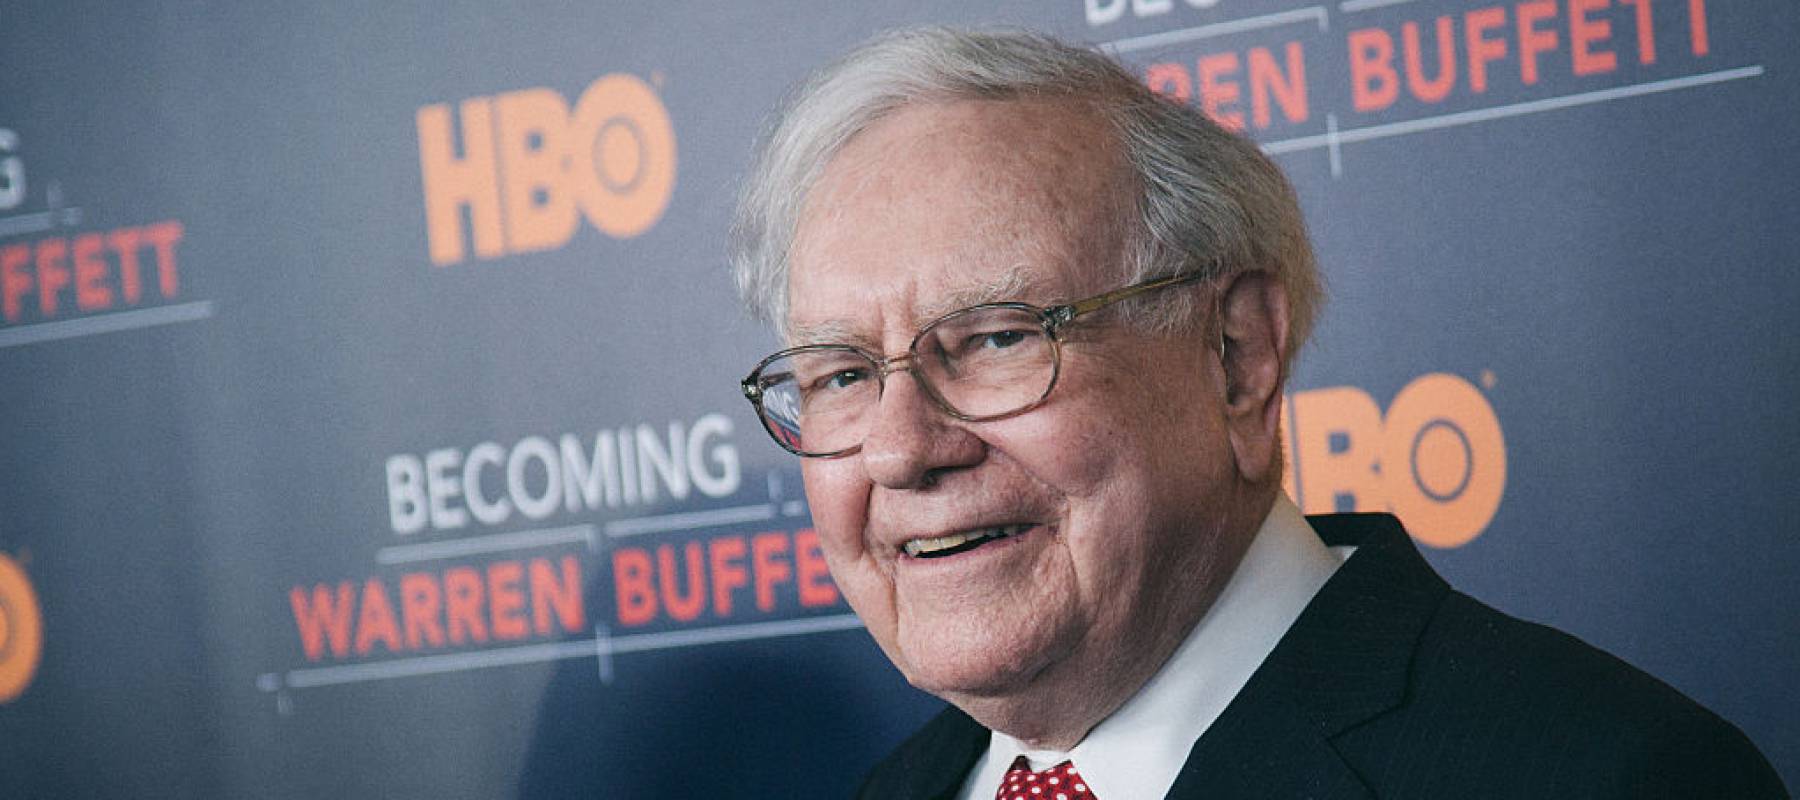 NEW YORK, NY - JANUARY 19: (Editors Note: Image has been processed using digital filters) Warren Buffett attends the &quot;Becoming Warren Buffett&quot;